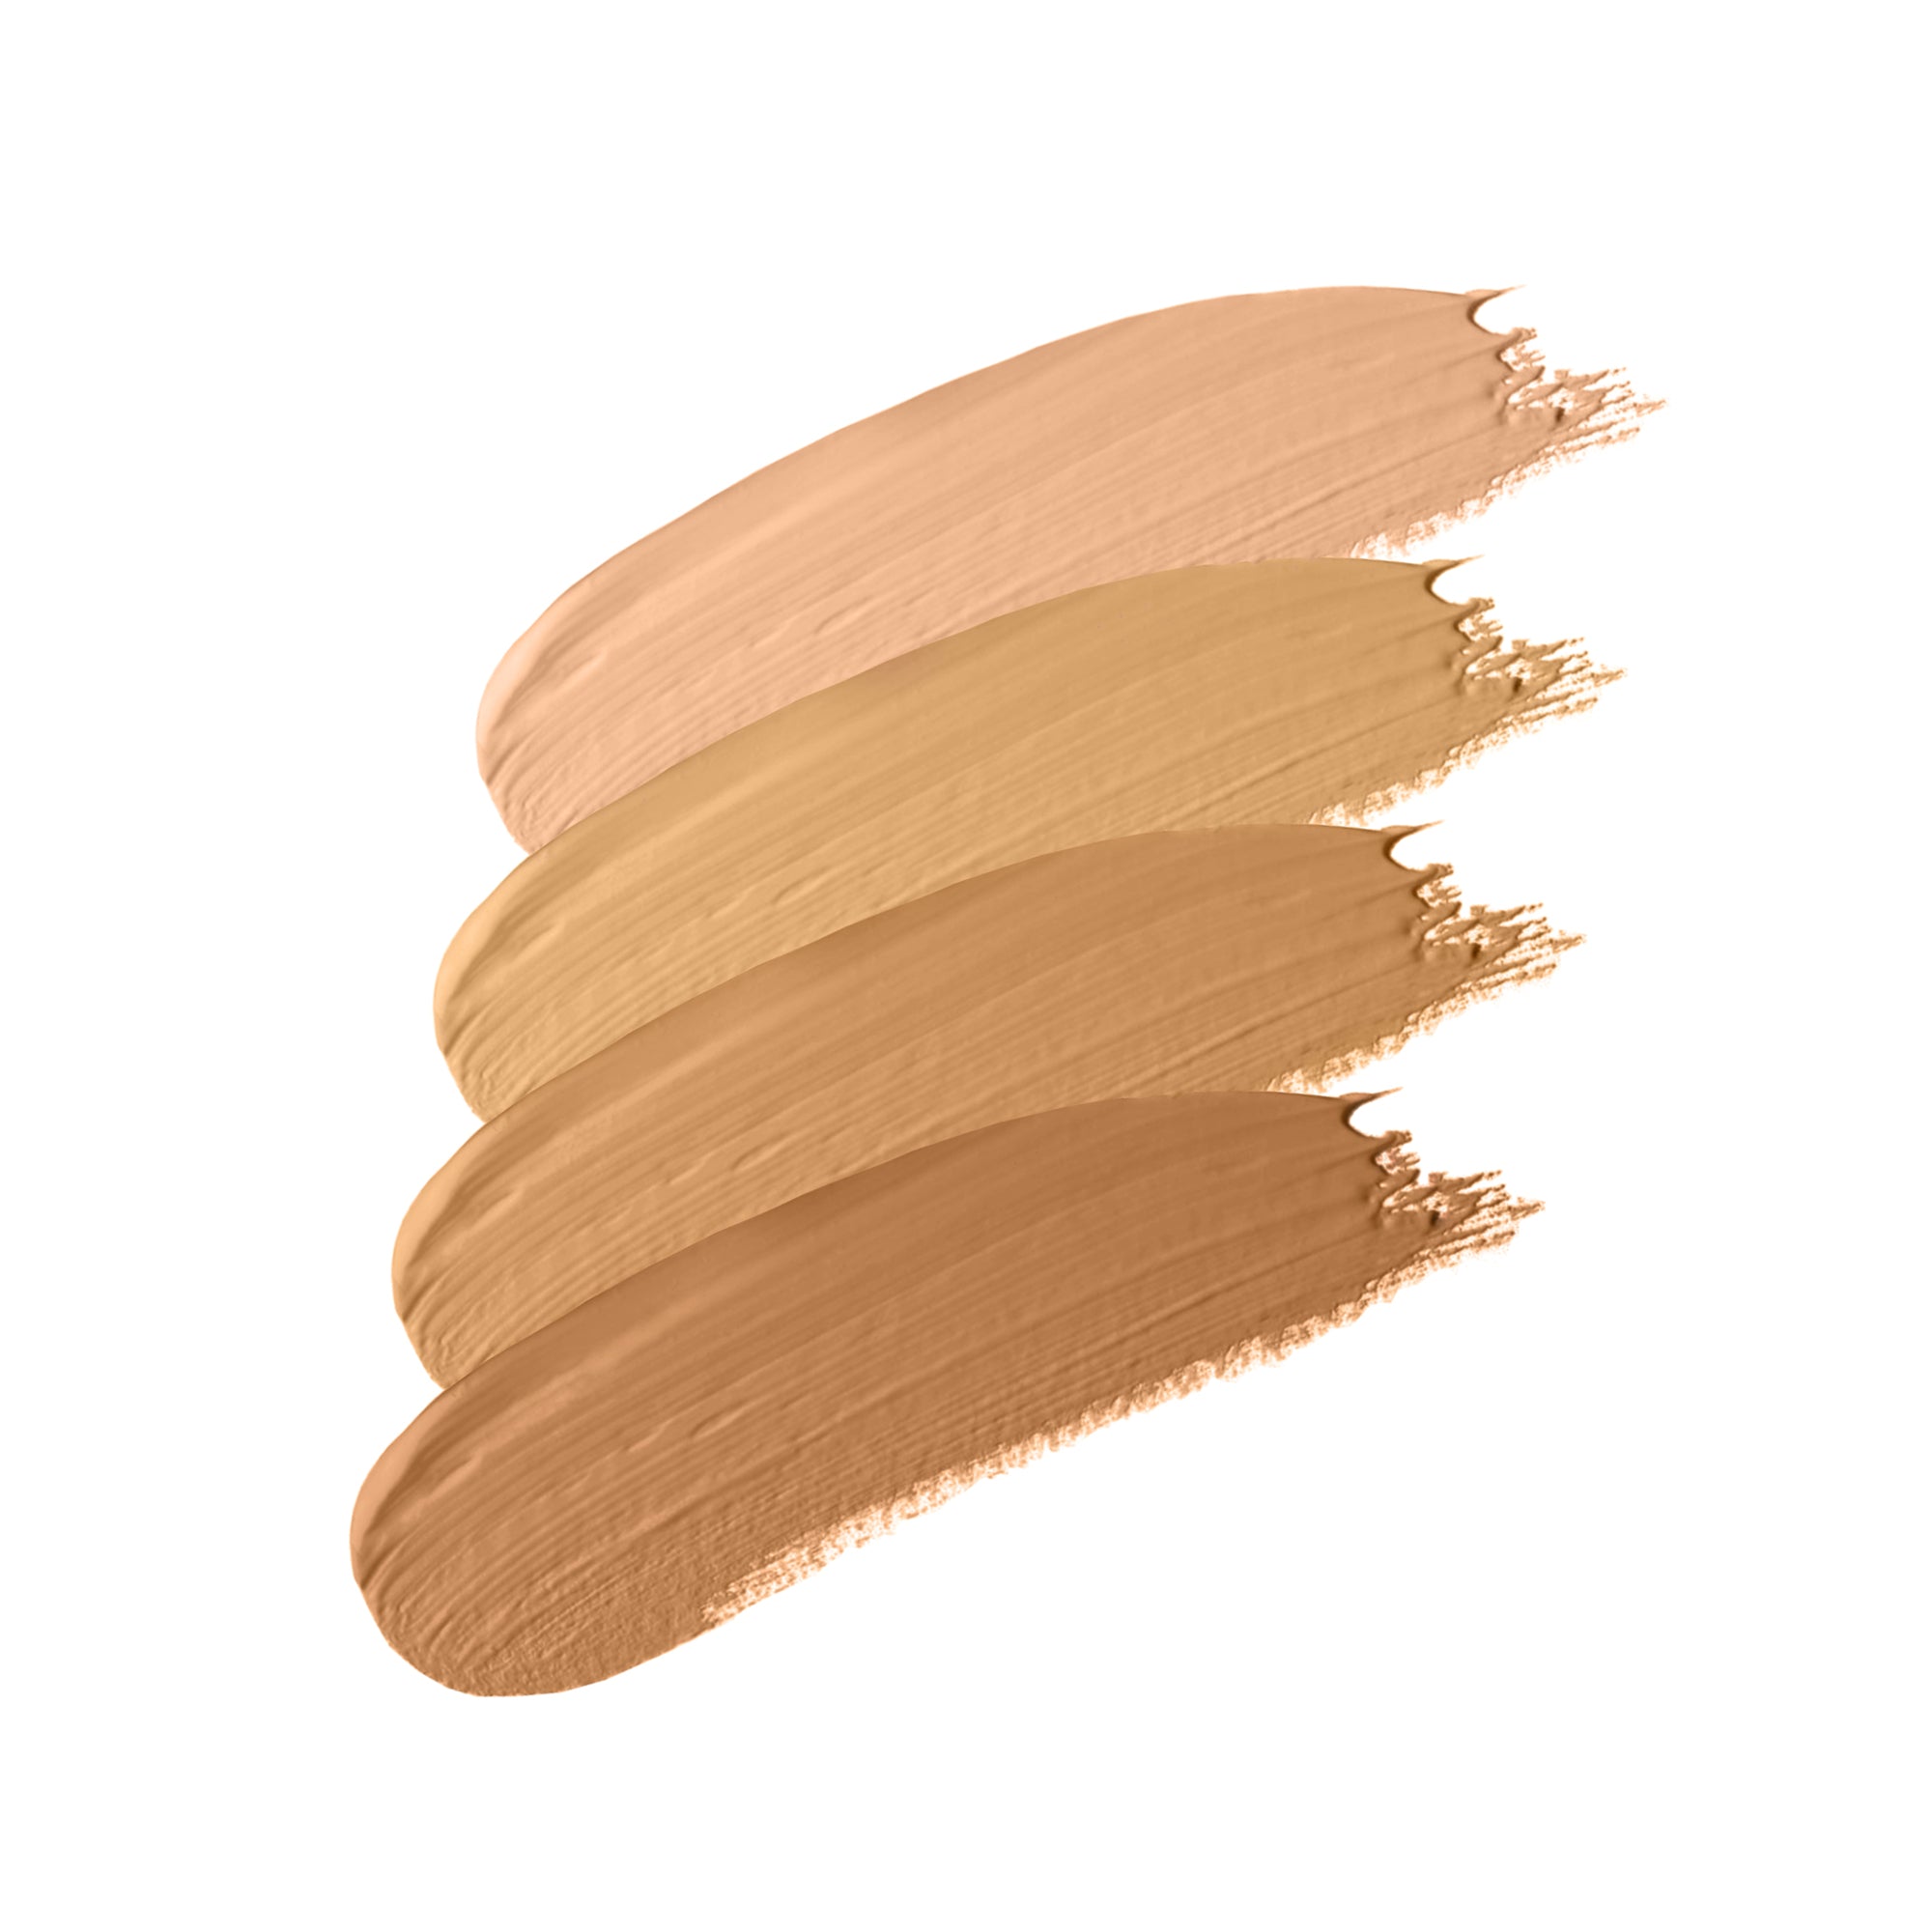 4 - WARM PEACH - buildable, creamy, hydrating concealer in warm peach undertone shade four in group shot